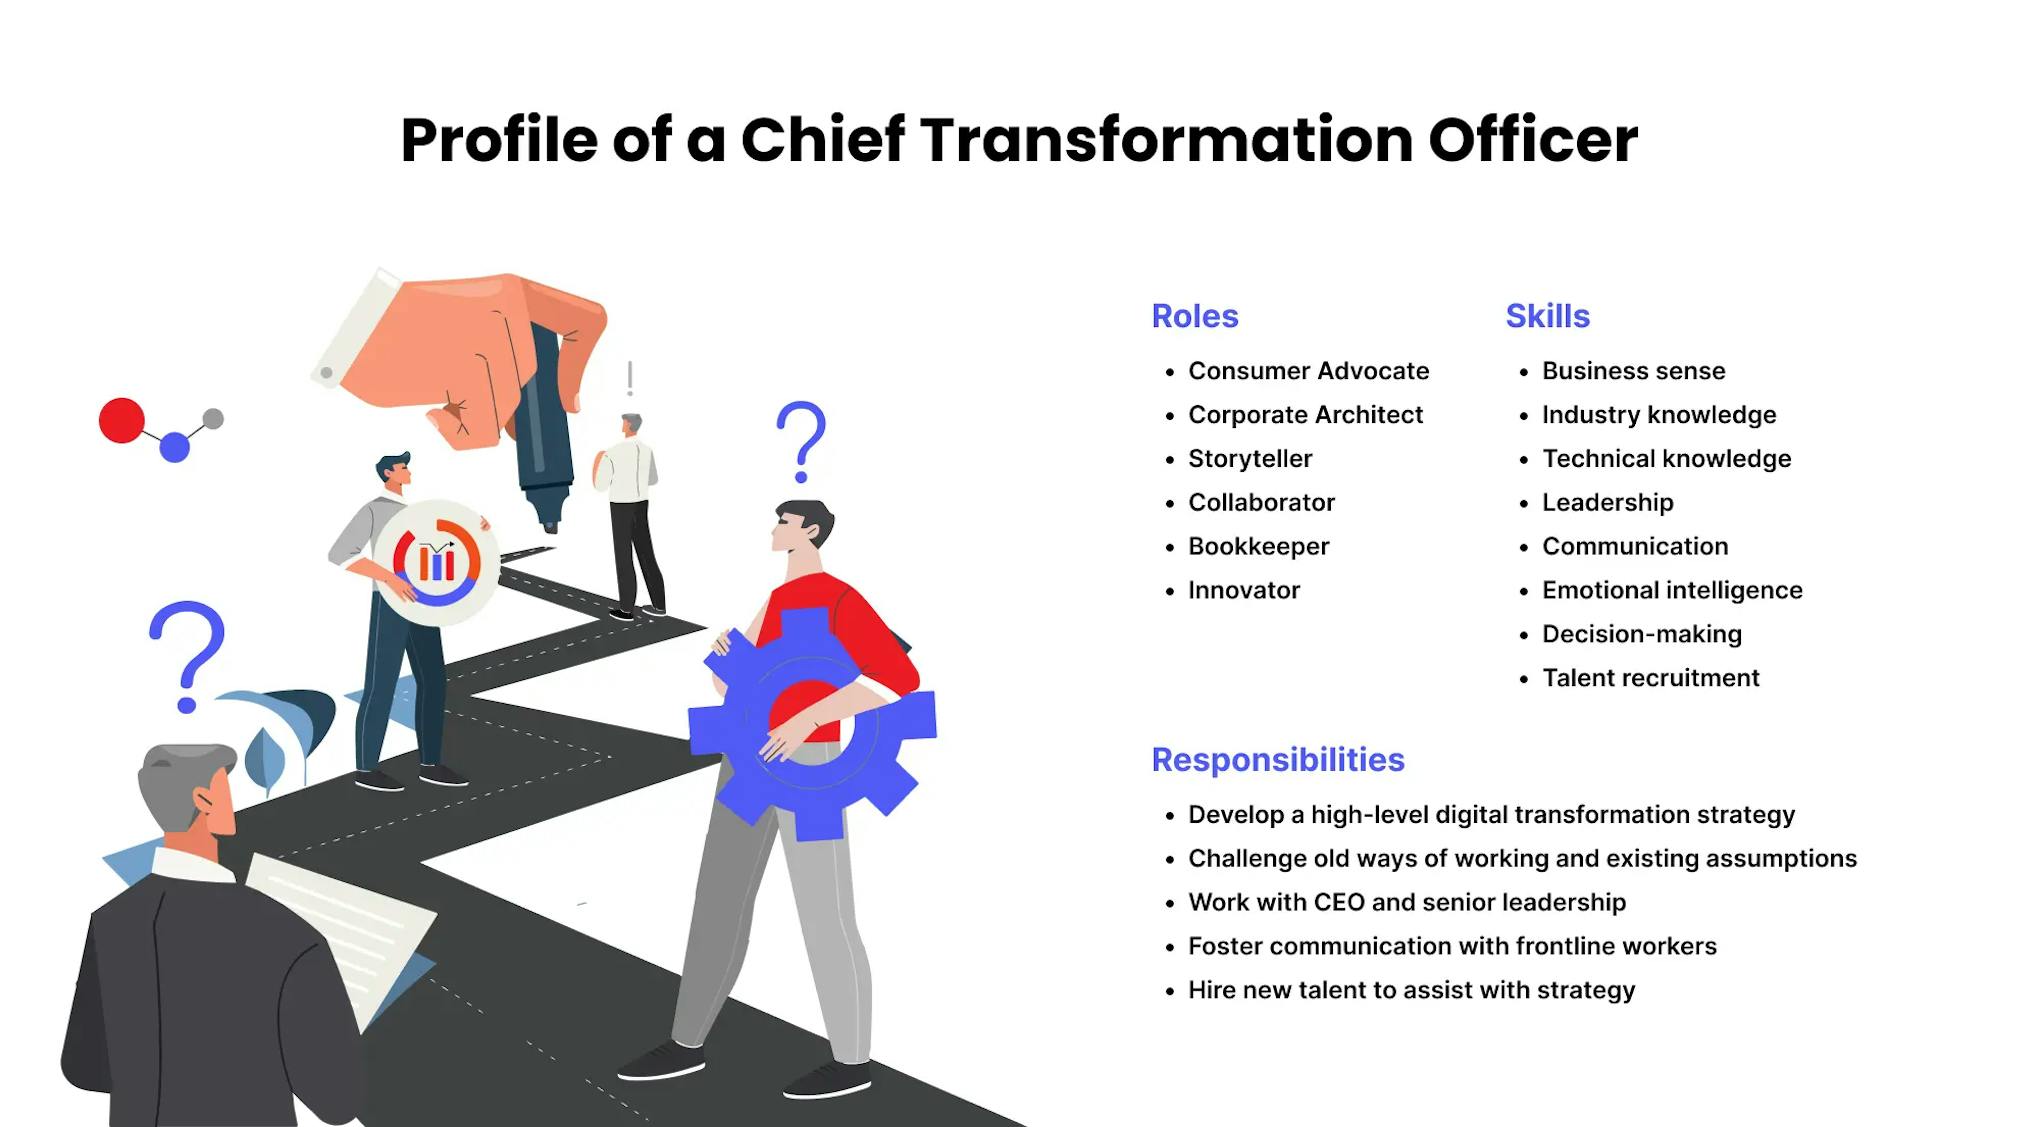 What Does the Chief Transformation Officer Do